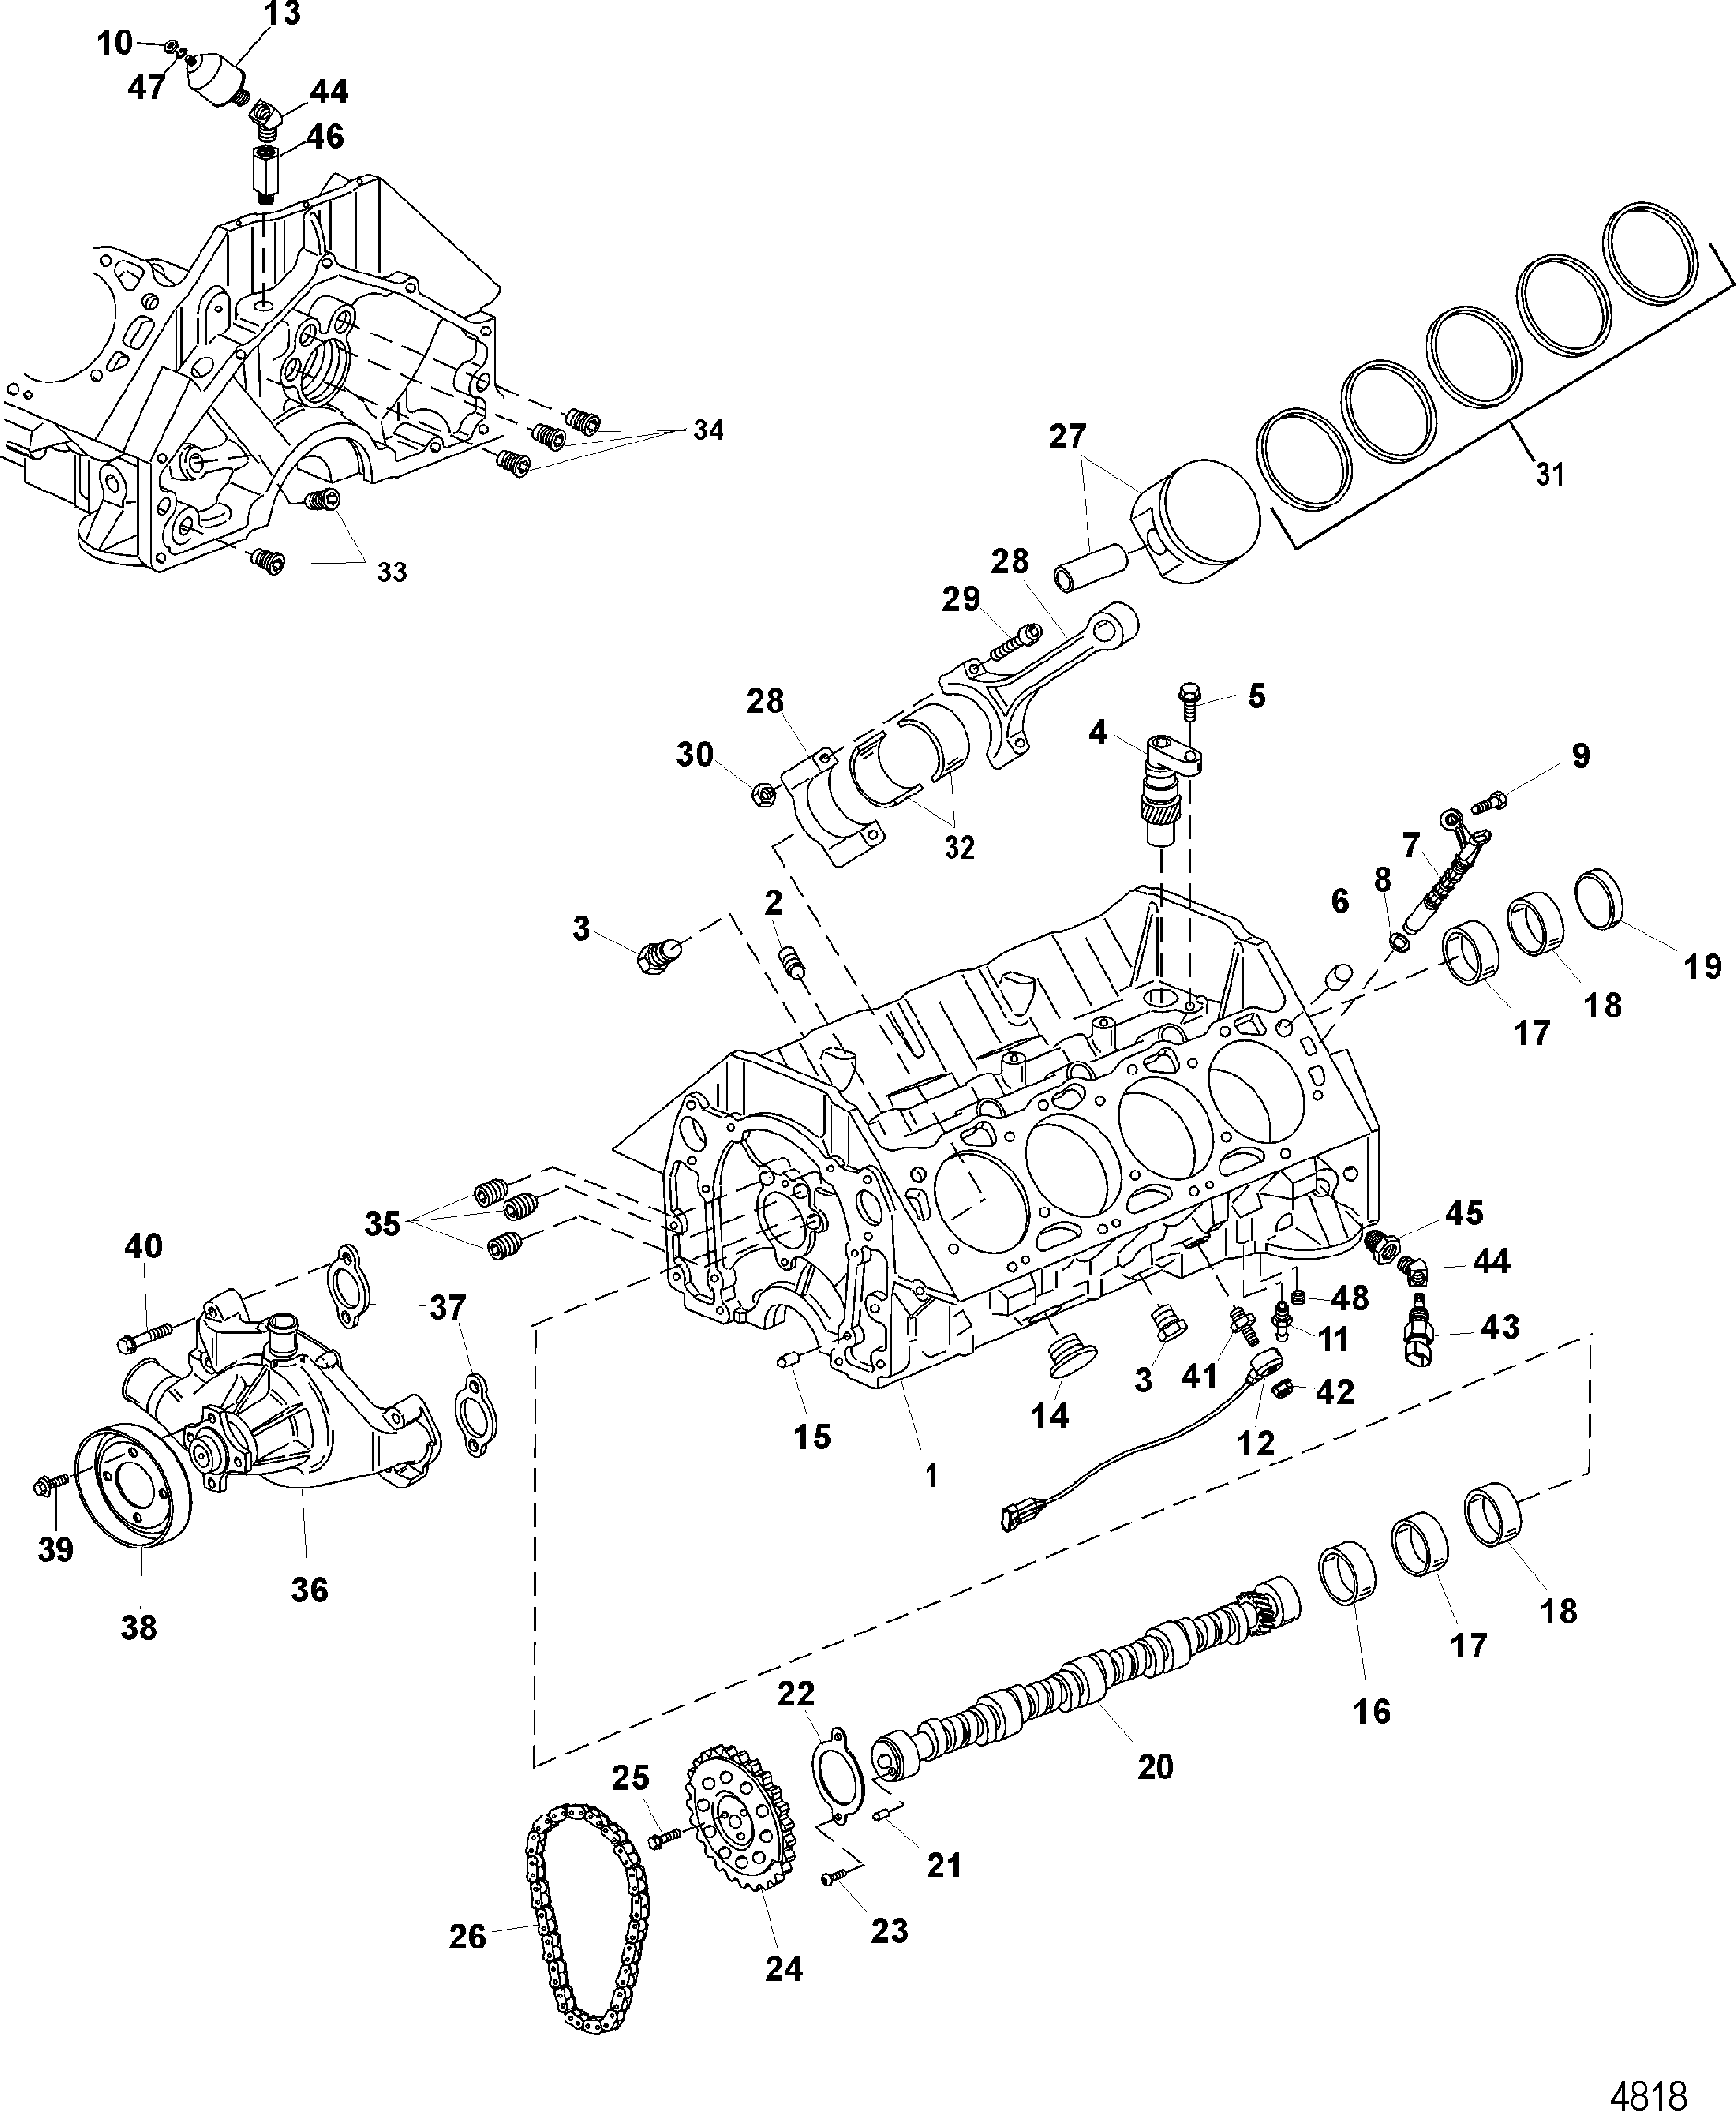 BLOCK-CAMSHAFT AND PISTONS